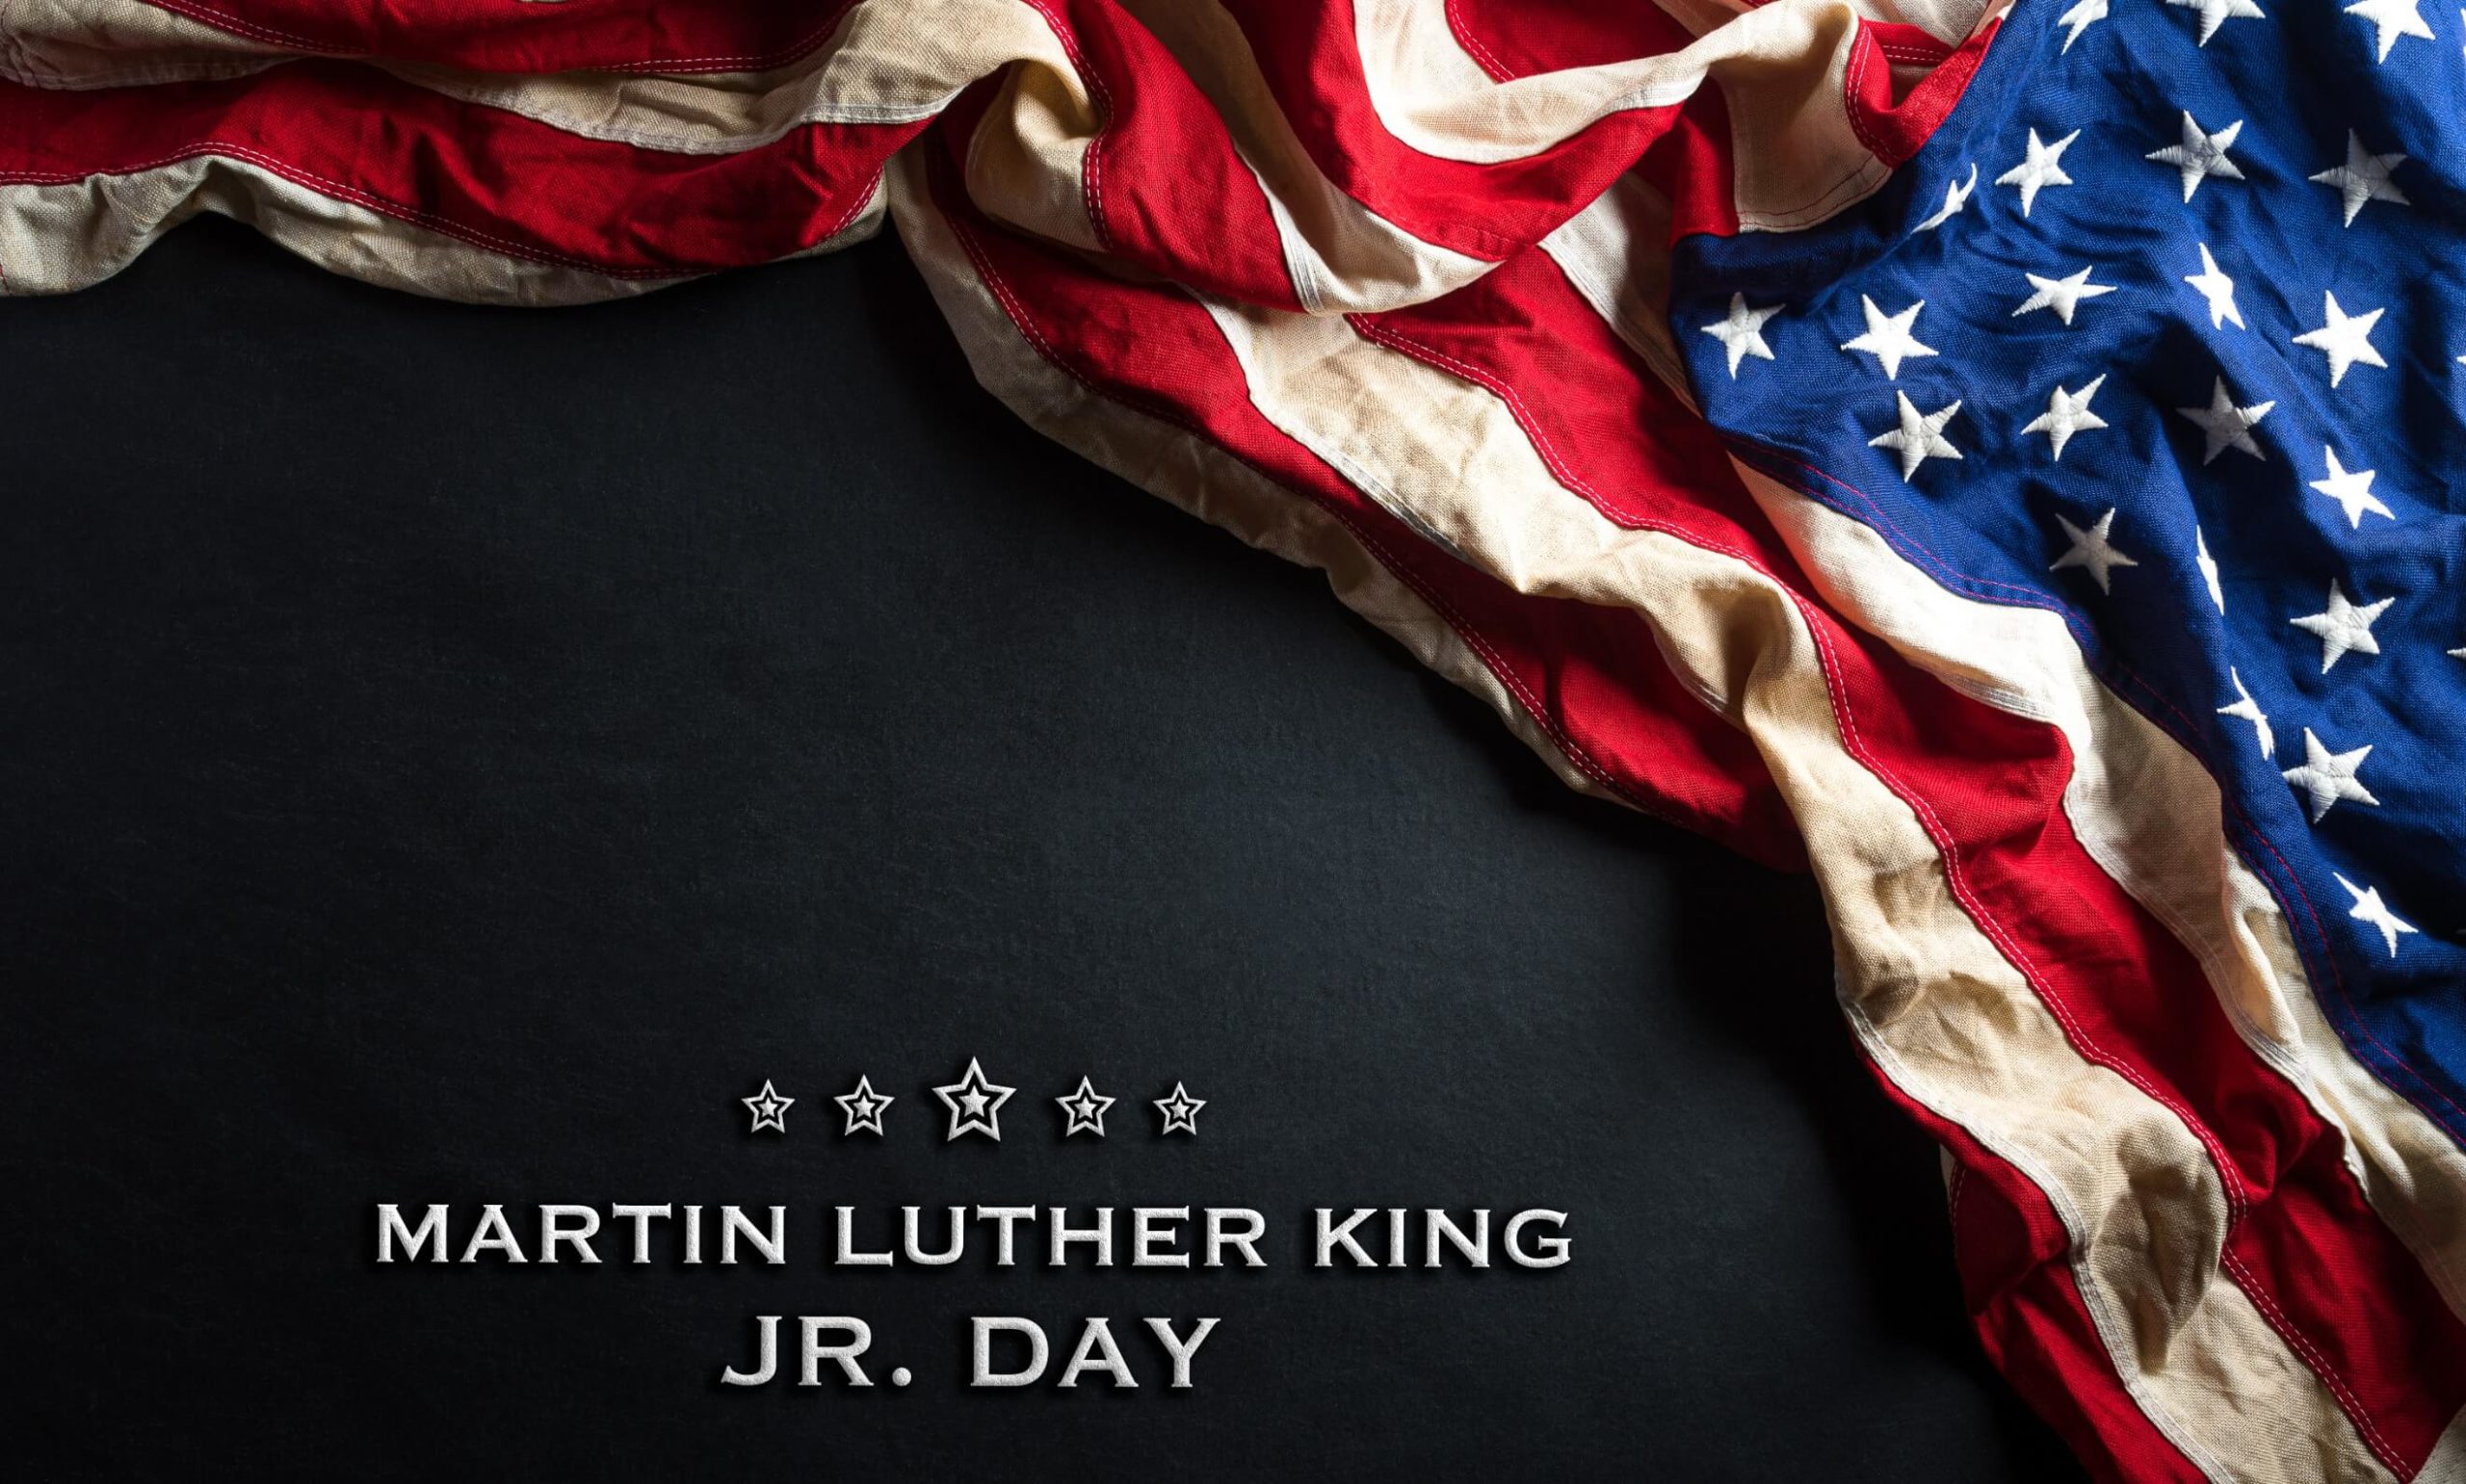 American flag against black background with text reading Martin Luther King Jr. Day.